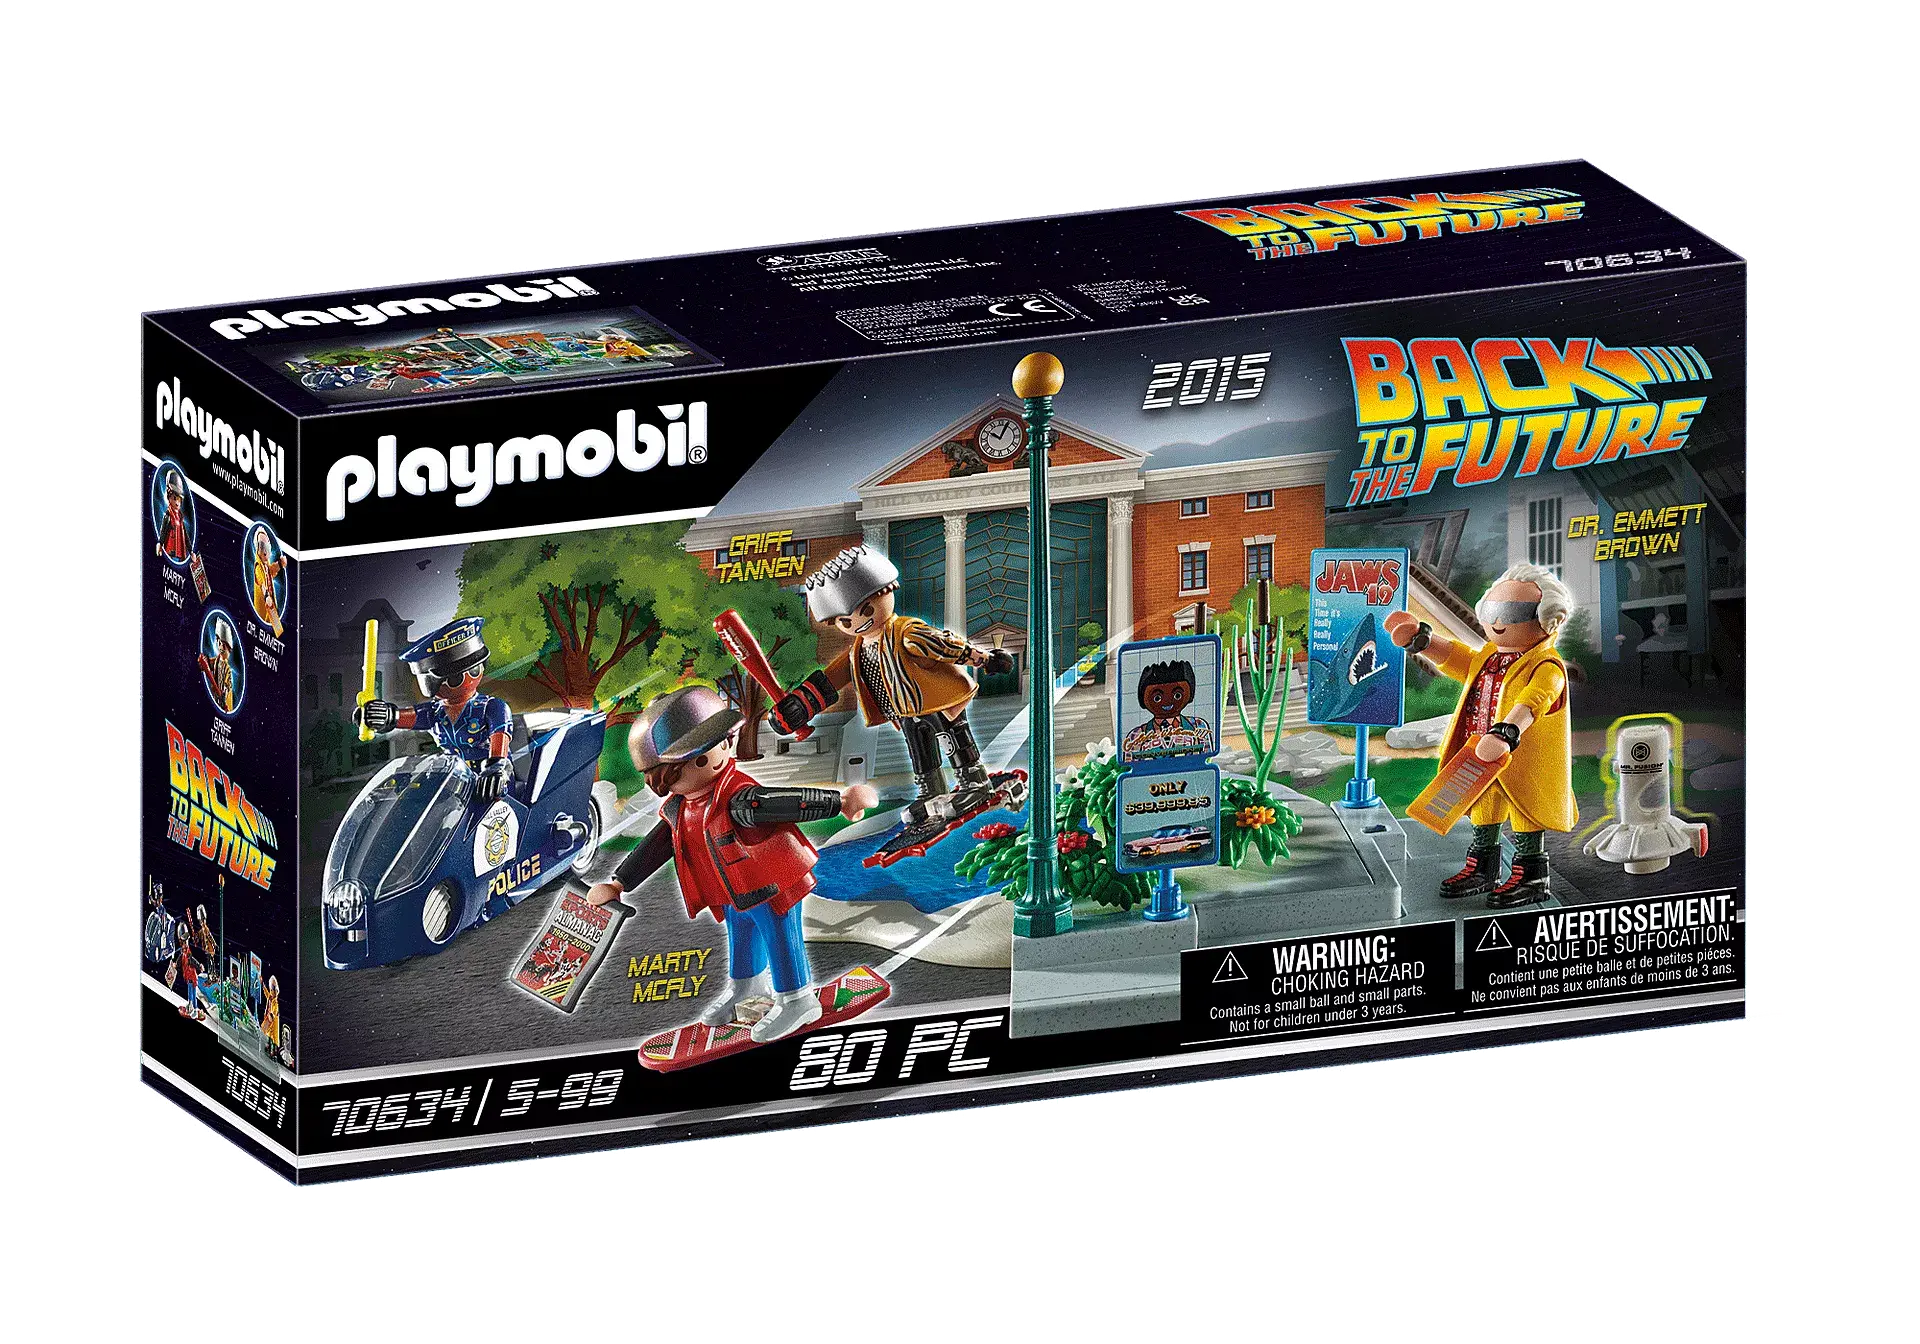 Playmobil Playmobil Back to the Future 70634 - Partie II - Course d'hoverboard